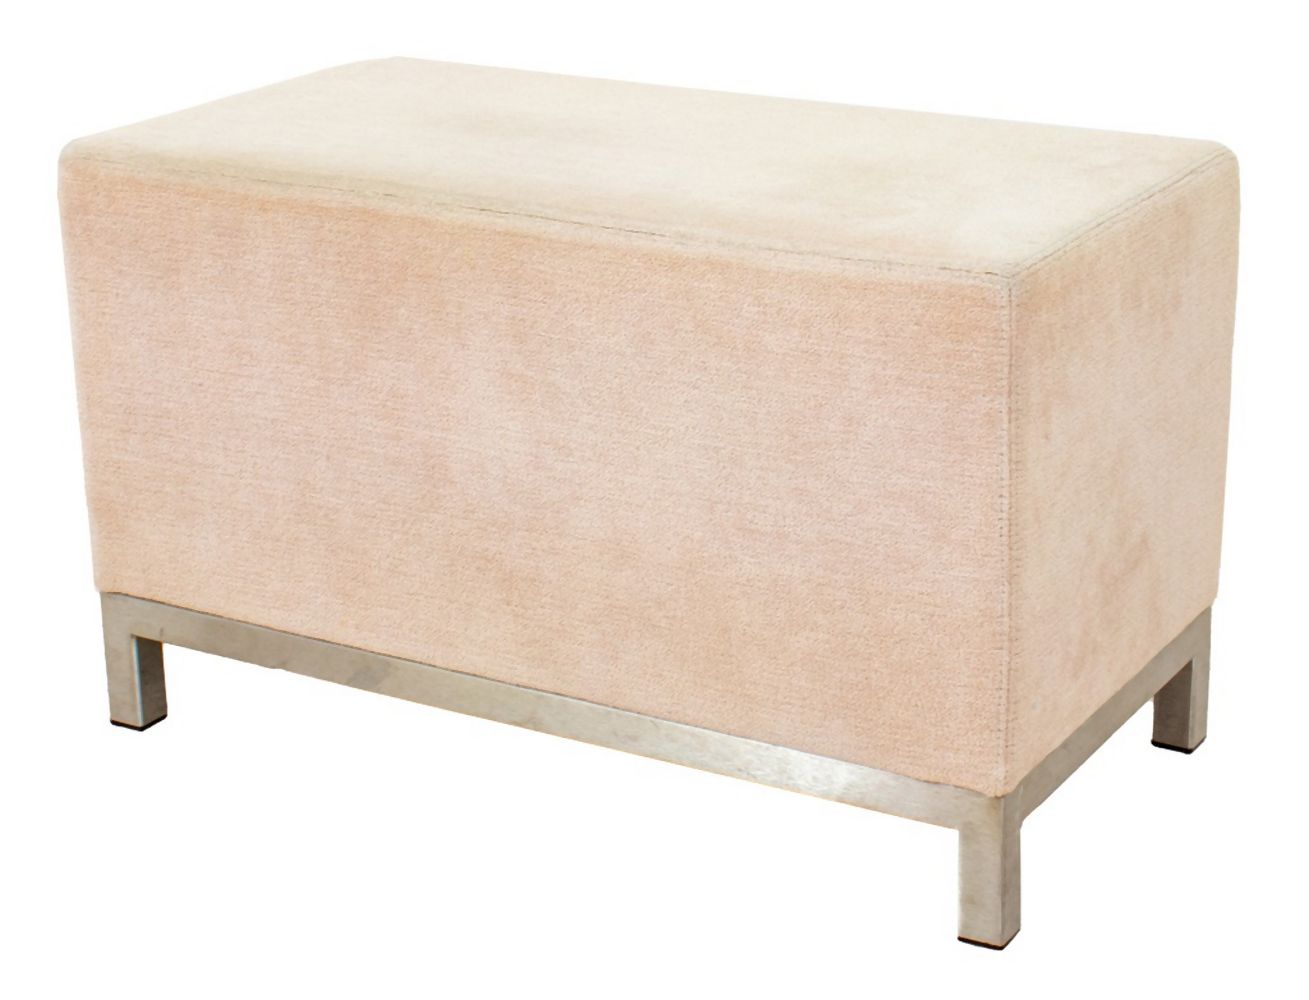 MODERN SMALL WHITE UPHOLSTERED 36000a